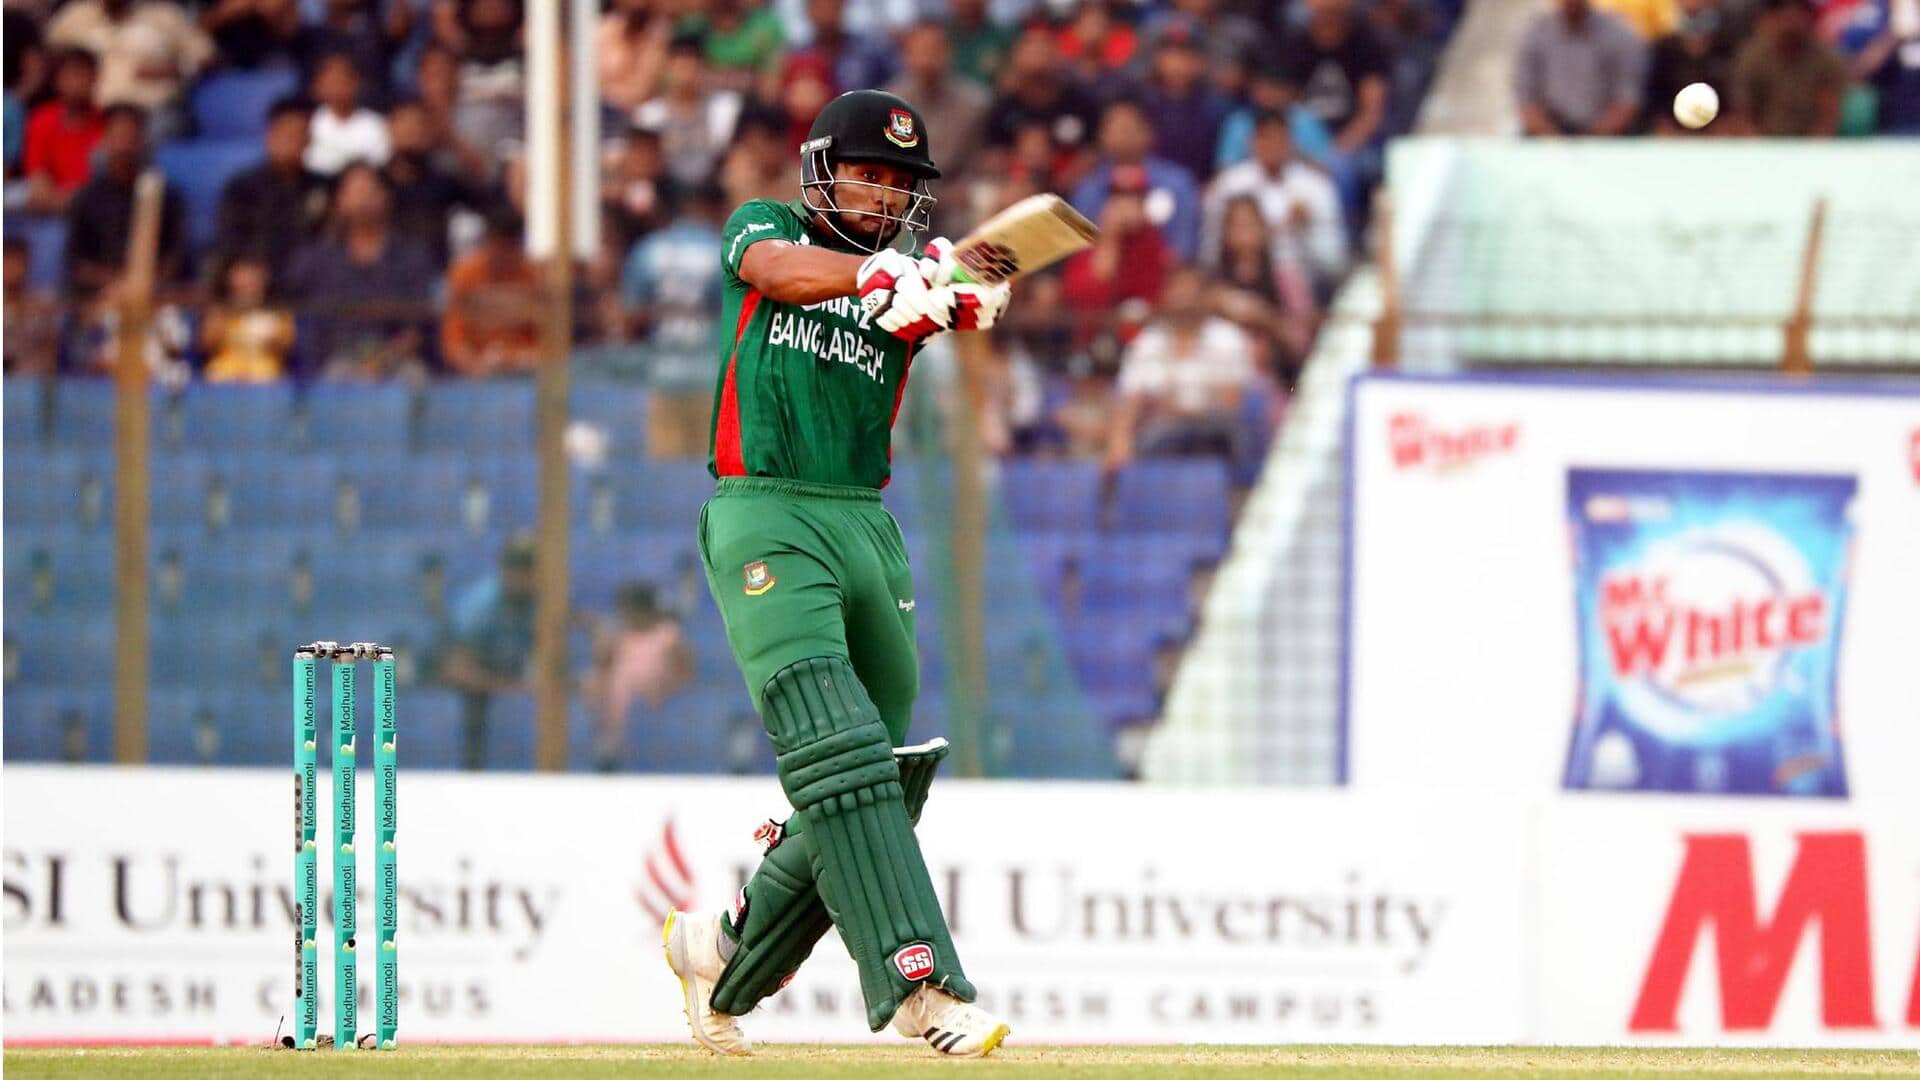 Bangladesh appoint Najmul Shanto as their all-format captain: Details